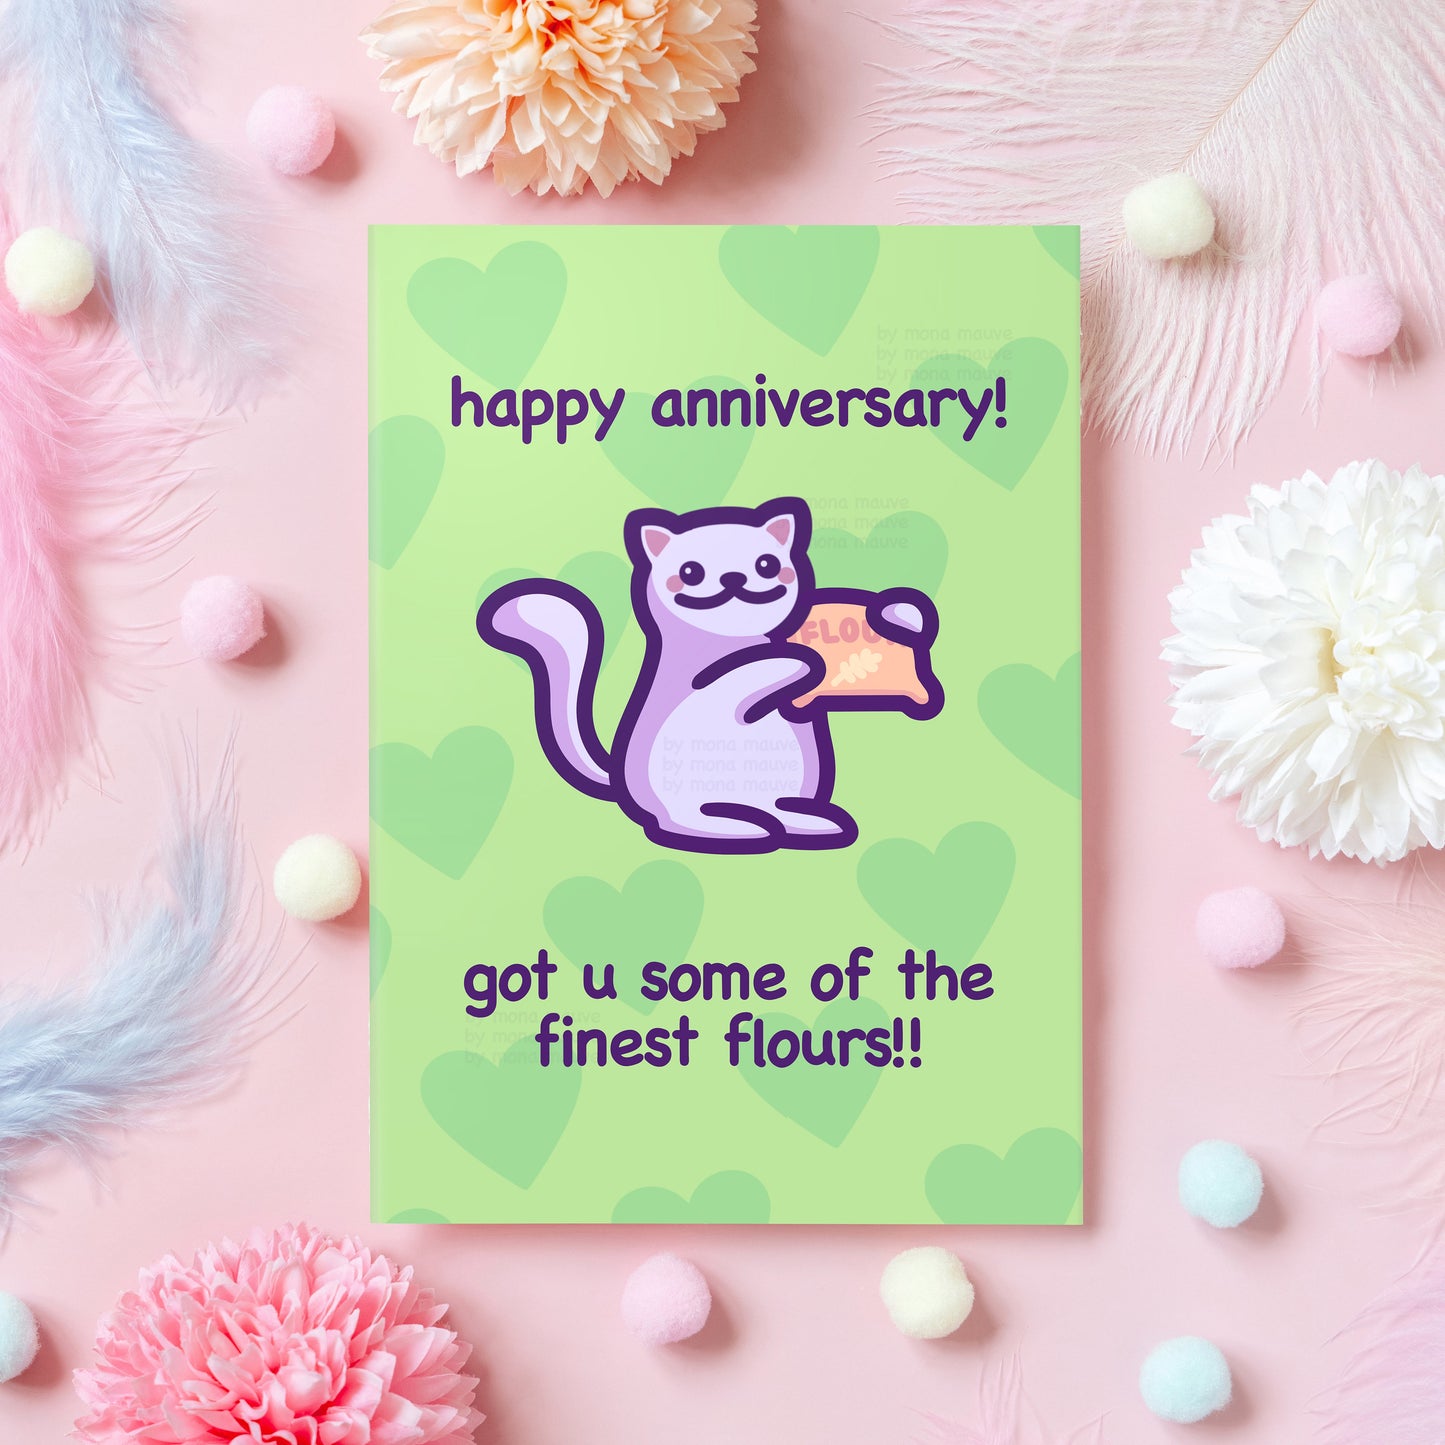 Funny Cat Anniversary Card | Finest Flowers Pun | Wedding or Dating Anniversary Card | For Husband, Wife, Boyfriend, Girlfriend - Her or Him